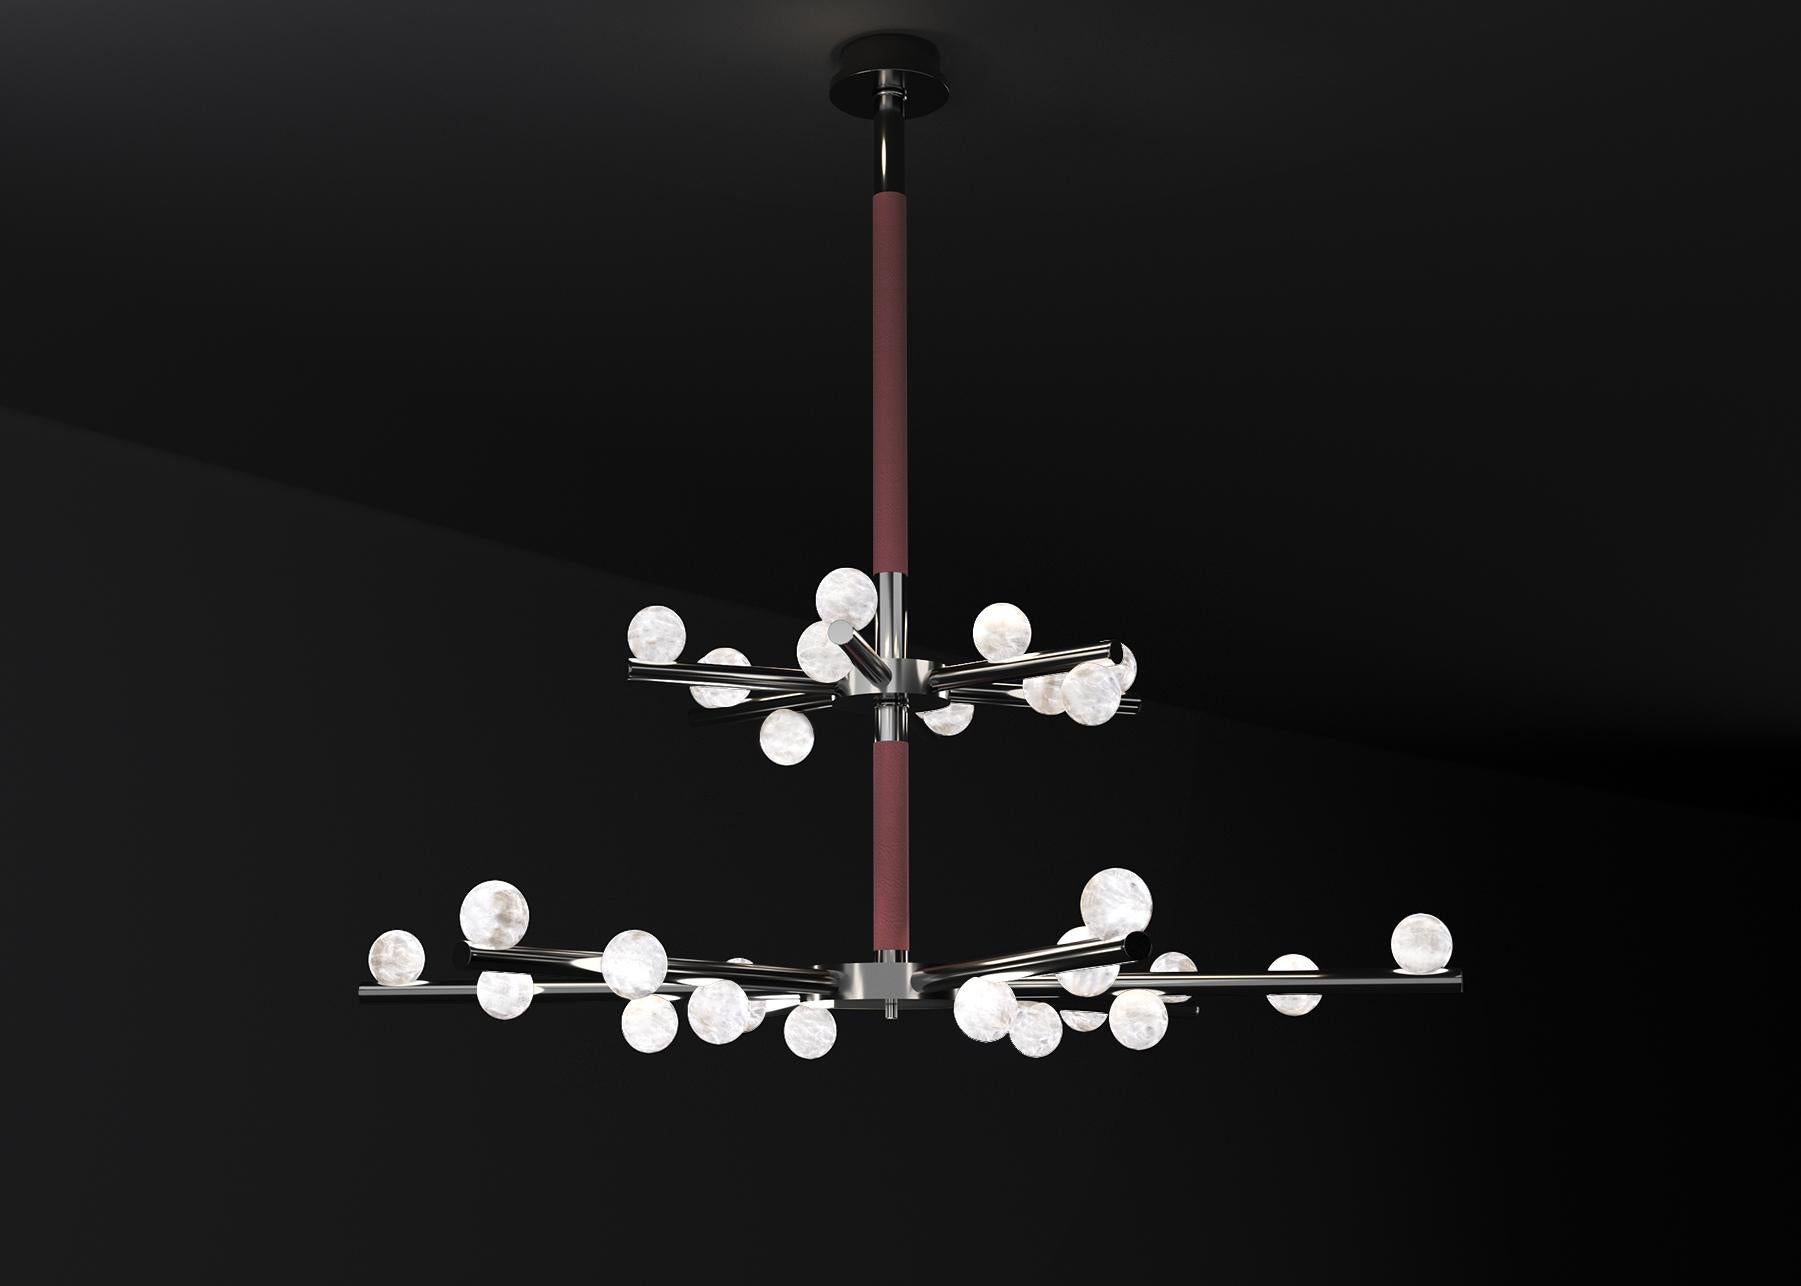 Demetra Shiny Black Metal Double Chandelier by Alabastro Italiano
Dimensions: D 85 x W 97 x H 96 cm.
Materials: White alabaster, shiny black metal and leather.

Available in different finishes: Shiny Silver, Bronze, Brushed Brass, Ruggine of